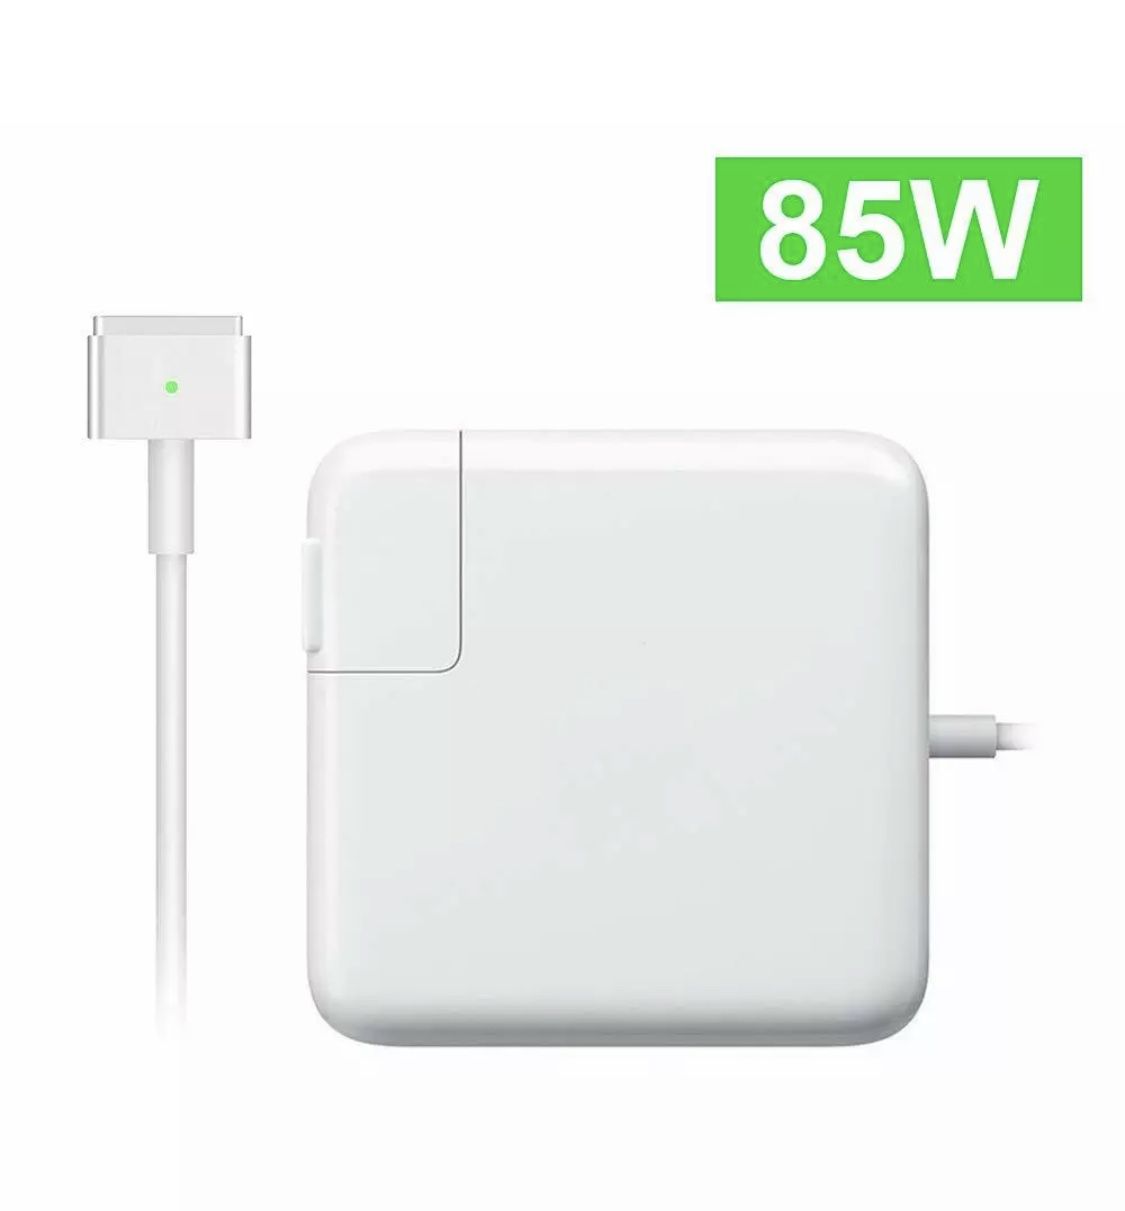 2012 to 2015 APPLE MacBook Pro Mag 2 85W Charger A1424 (T-Shaped)